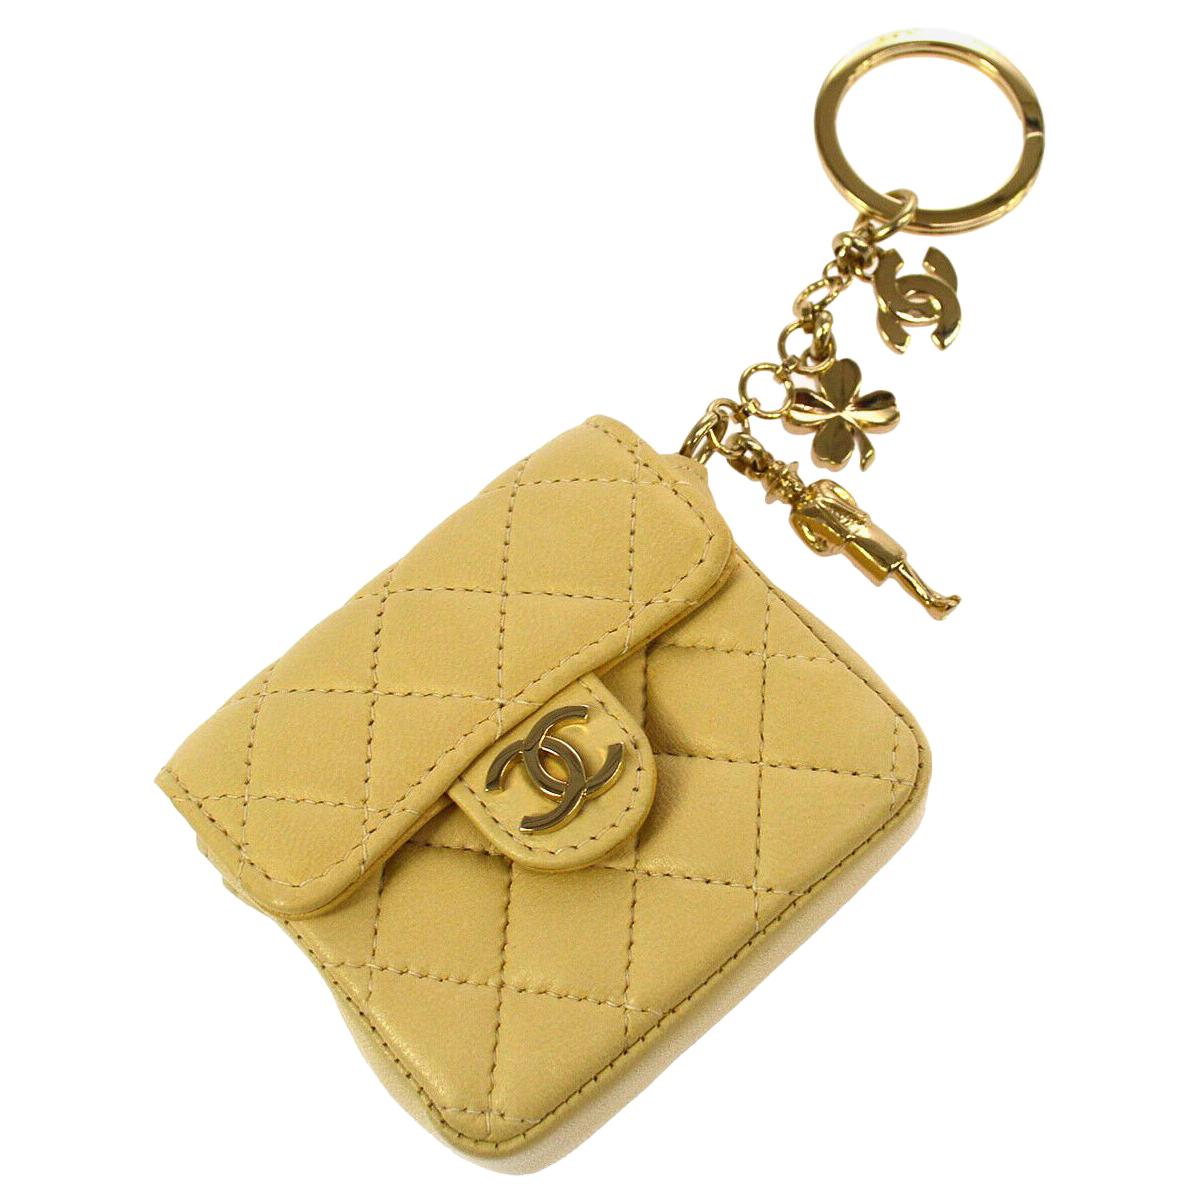 Chanel Leather Tan Nude Charm Belt Party Micro Mini Chain Flap Bag in Box